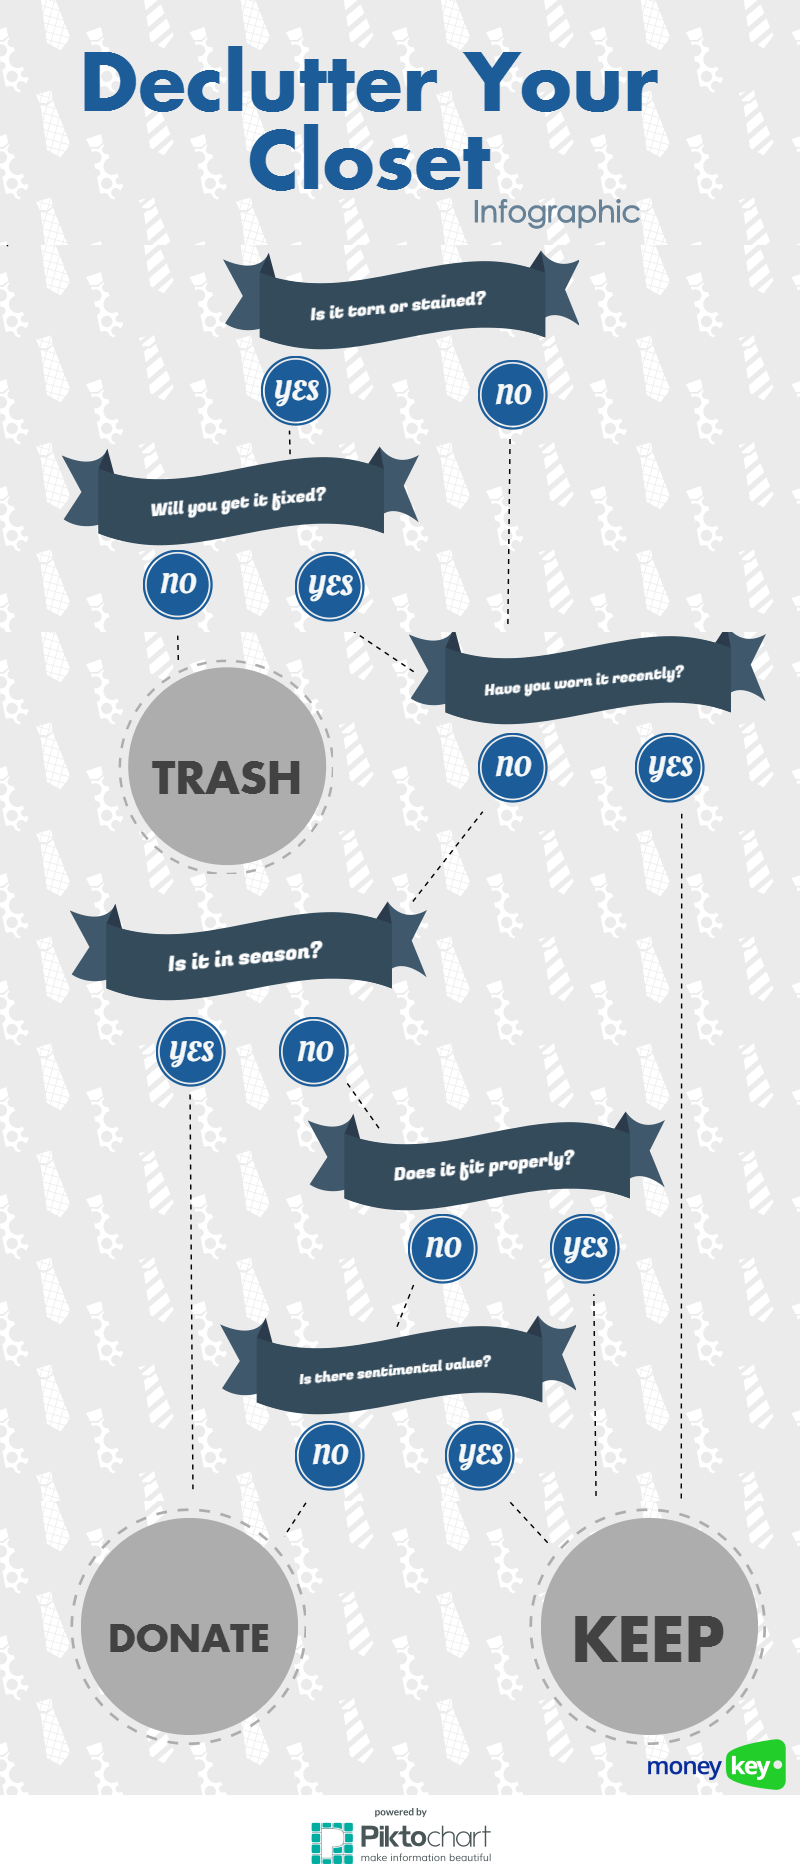 Infographic to declutter your closet